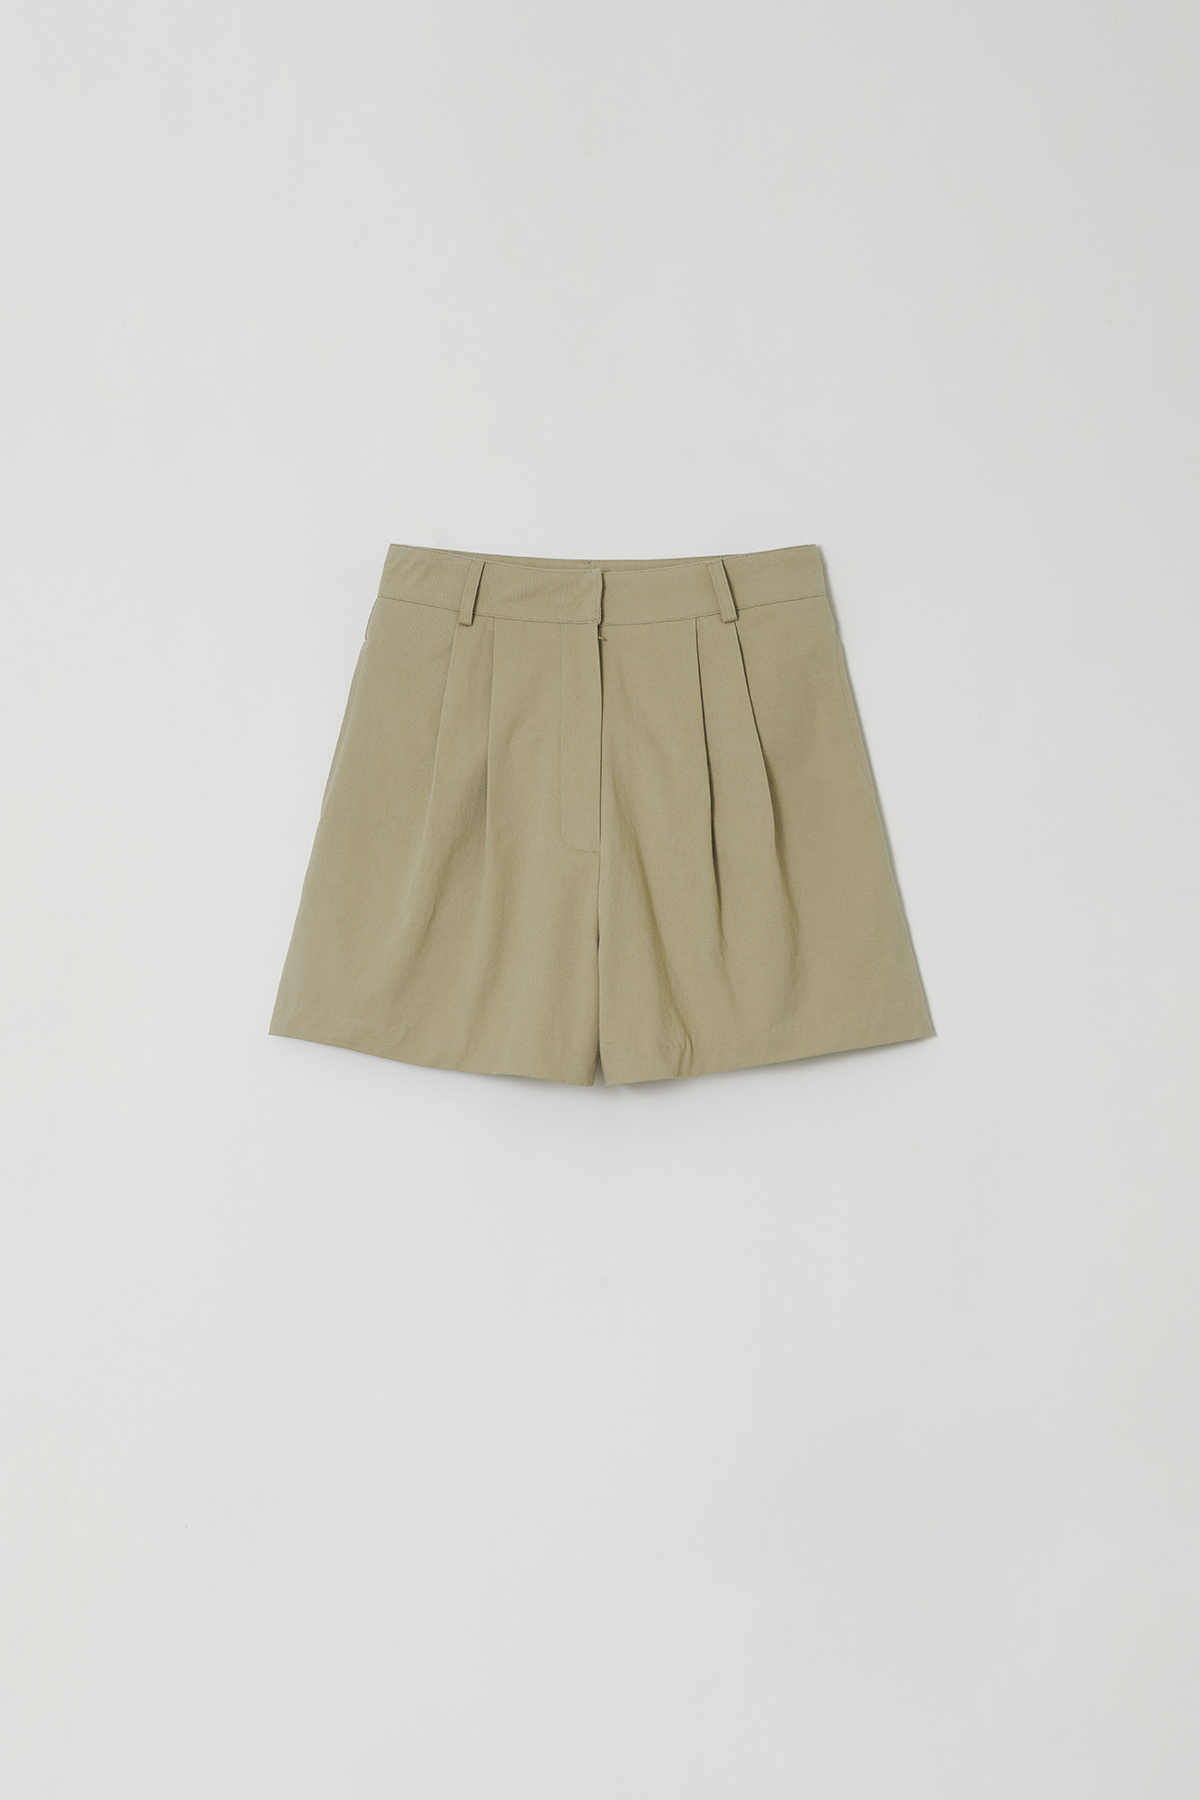 [NEW] TWO TUCK COTTON SHORTS, BEIGE